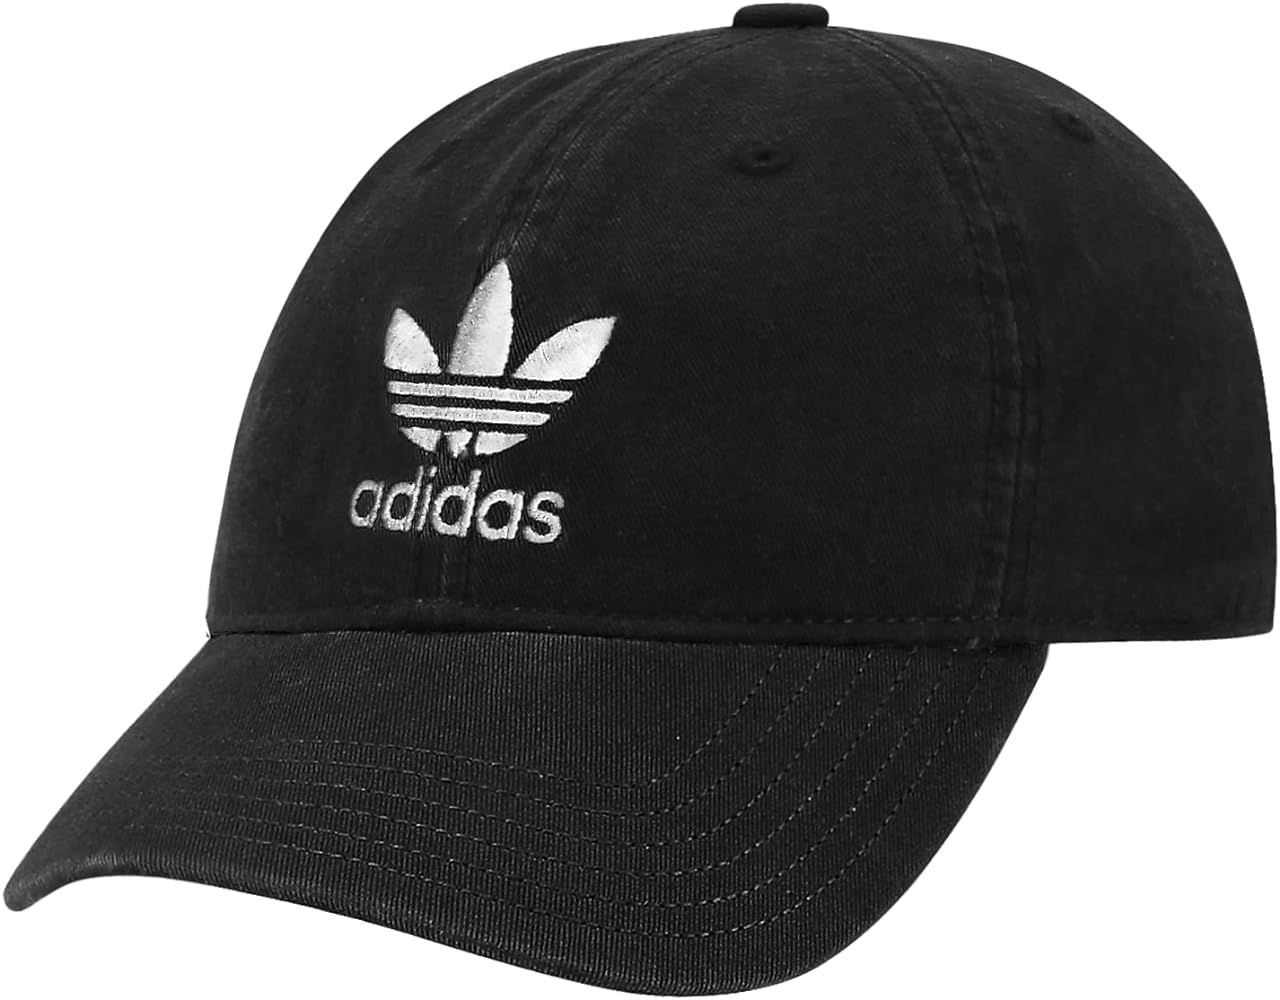 adidas Originals Kids-Boy's/Girl's Washed Cotton Relaxed Fit Strapback Cap | Amazon (US)